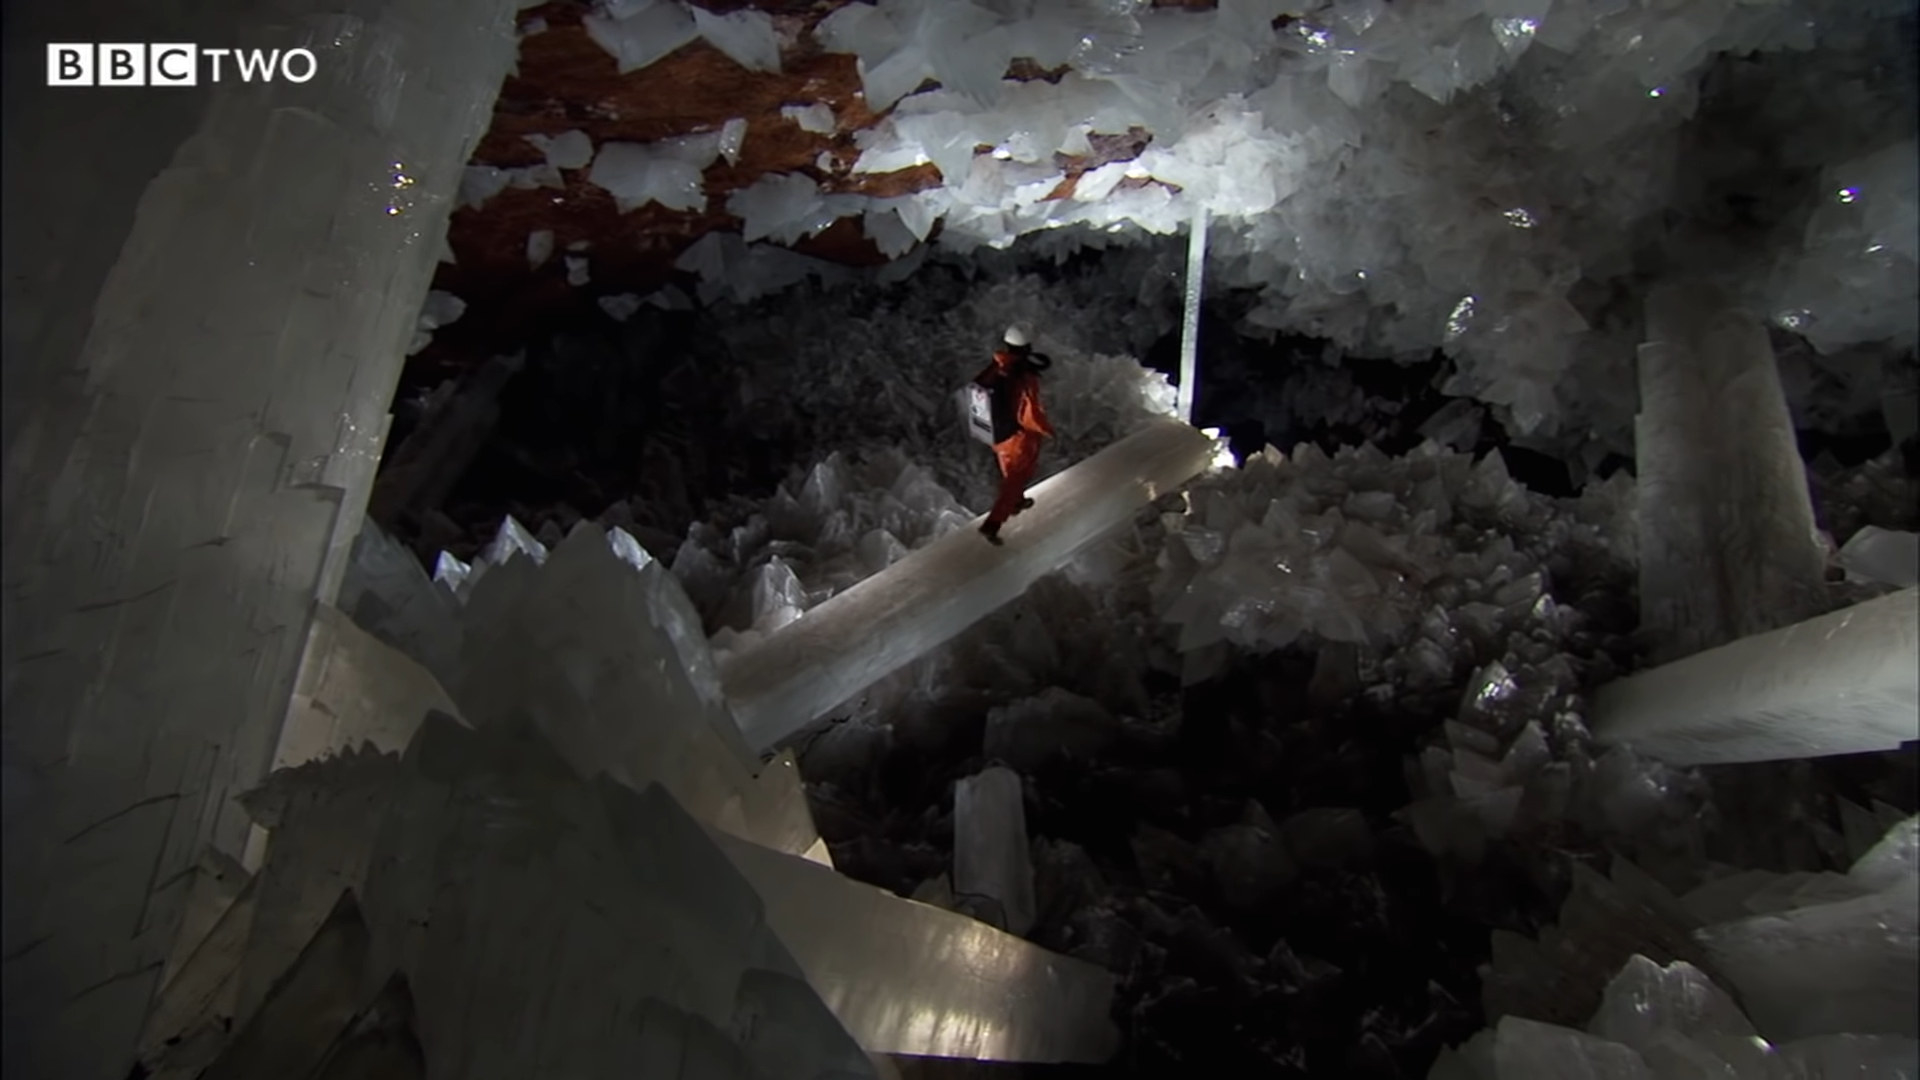 the large crystals